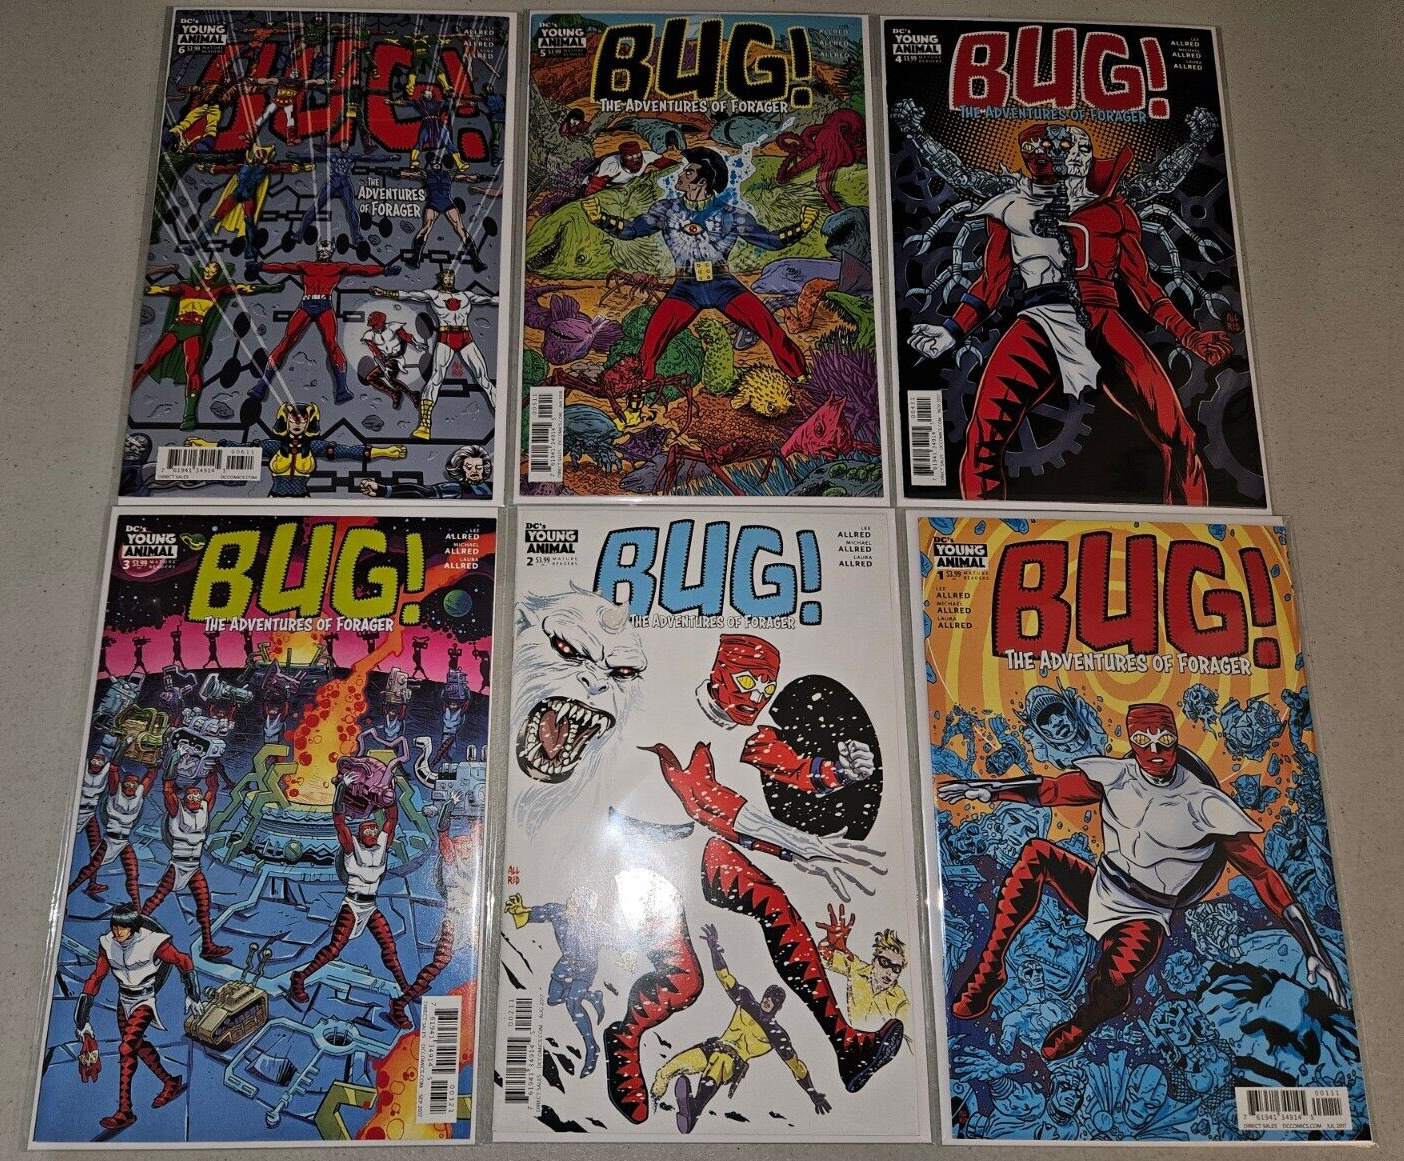 Bug: The Adventures of Forager #1-6 (Complete 2017 DC series) 1 2 3 4 5 6 Lot